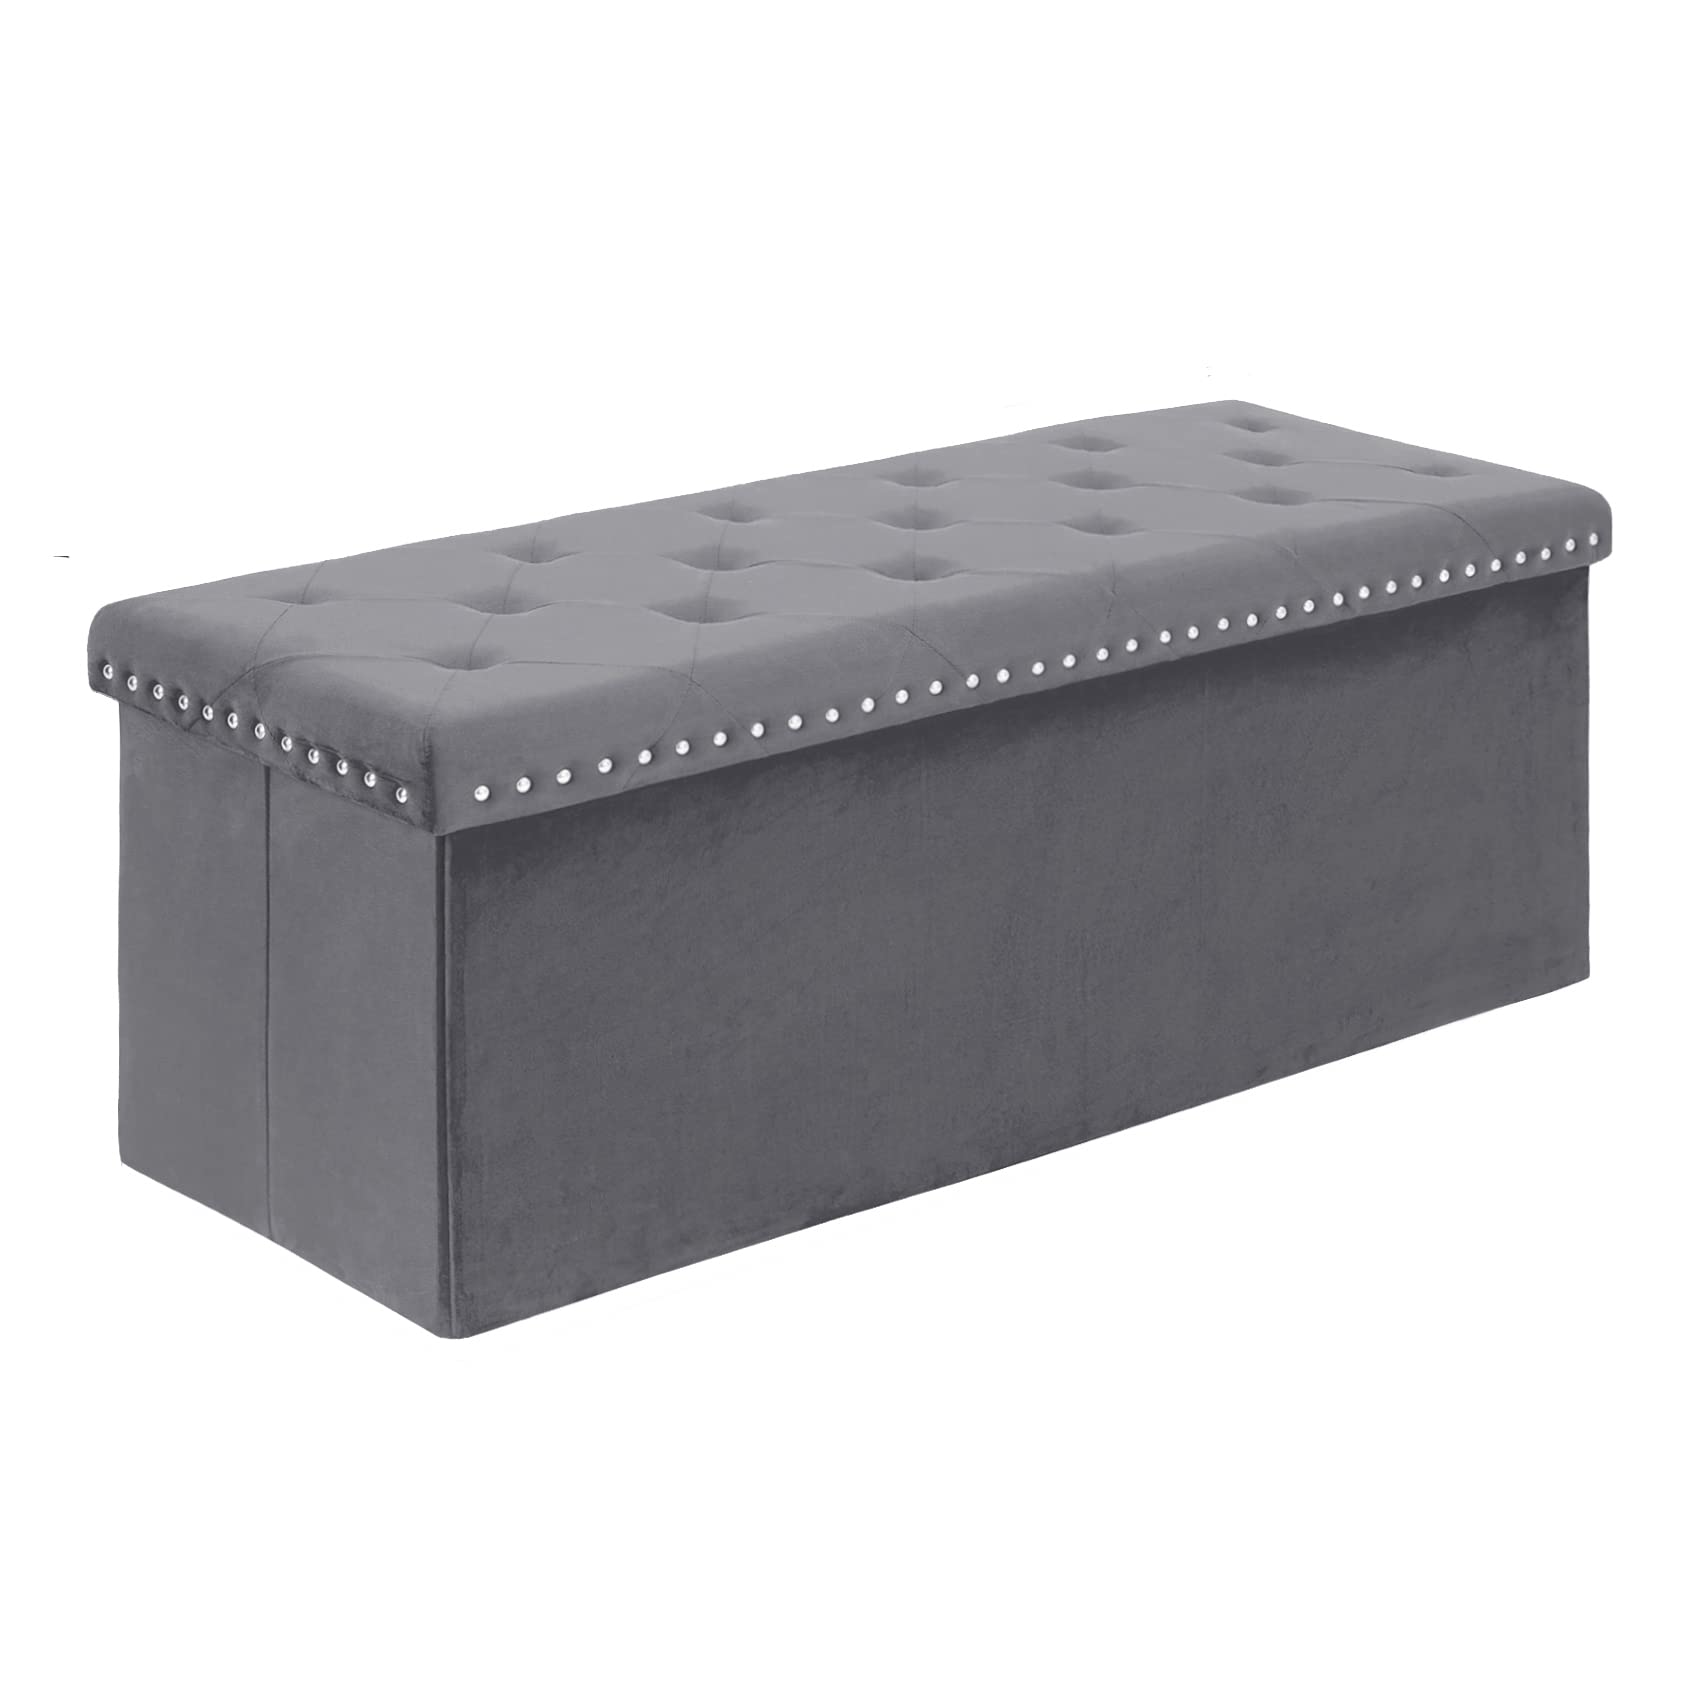 B FSOBEIIALEO Storage Ottoman Bench, Folding Tufted Ottomans with Storage, Extra Large 140L Toy Chest Storage Boxes Footrest Bench for Bedroom, Luxury Velvet Fabric 43 Inches Grey